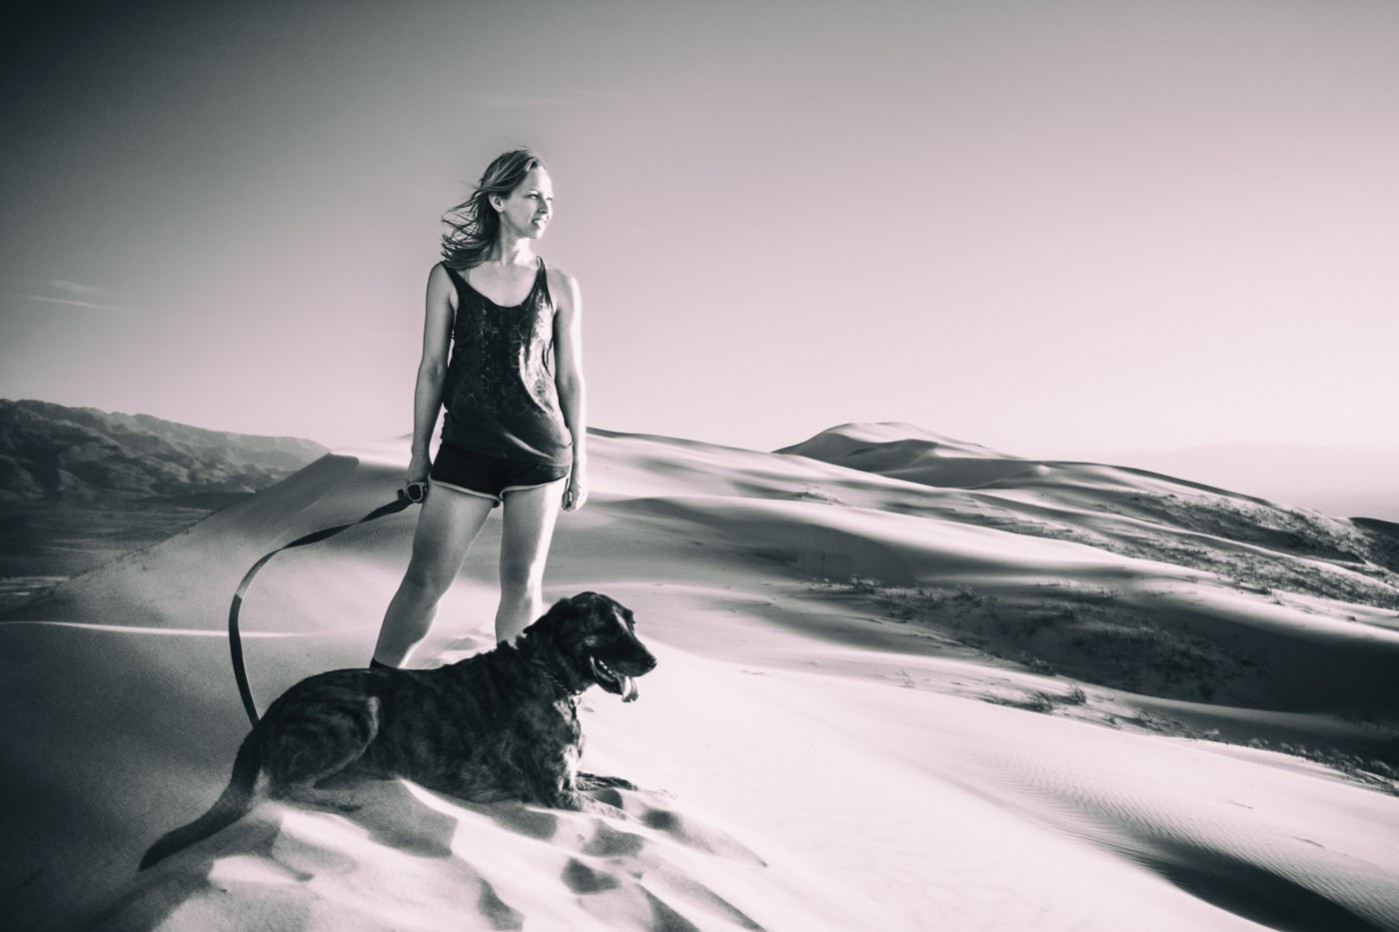 Diana and Tiger. Kelso Dunes, Mojave National Preserve. Maybe all this dust has something to do with the places I've taken the X-E1. X-E1, 18mm, f/2.0, 1/1500, ISO 200